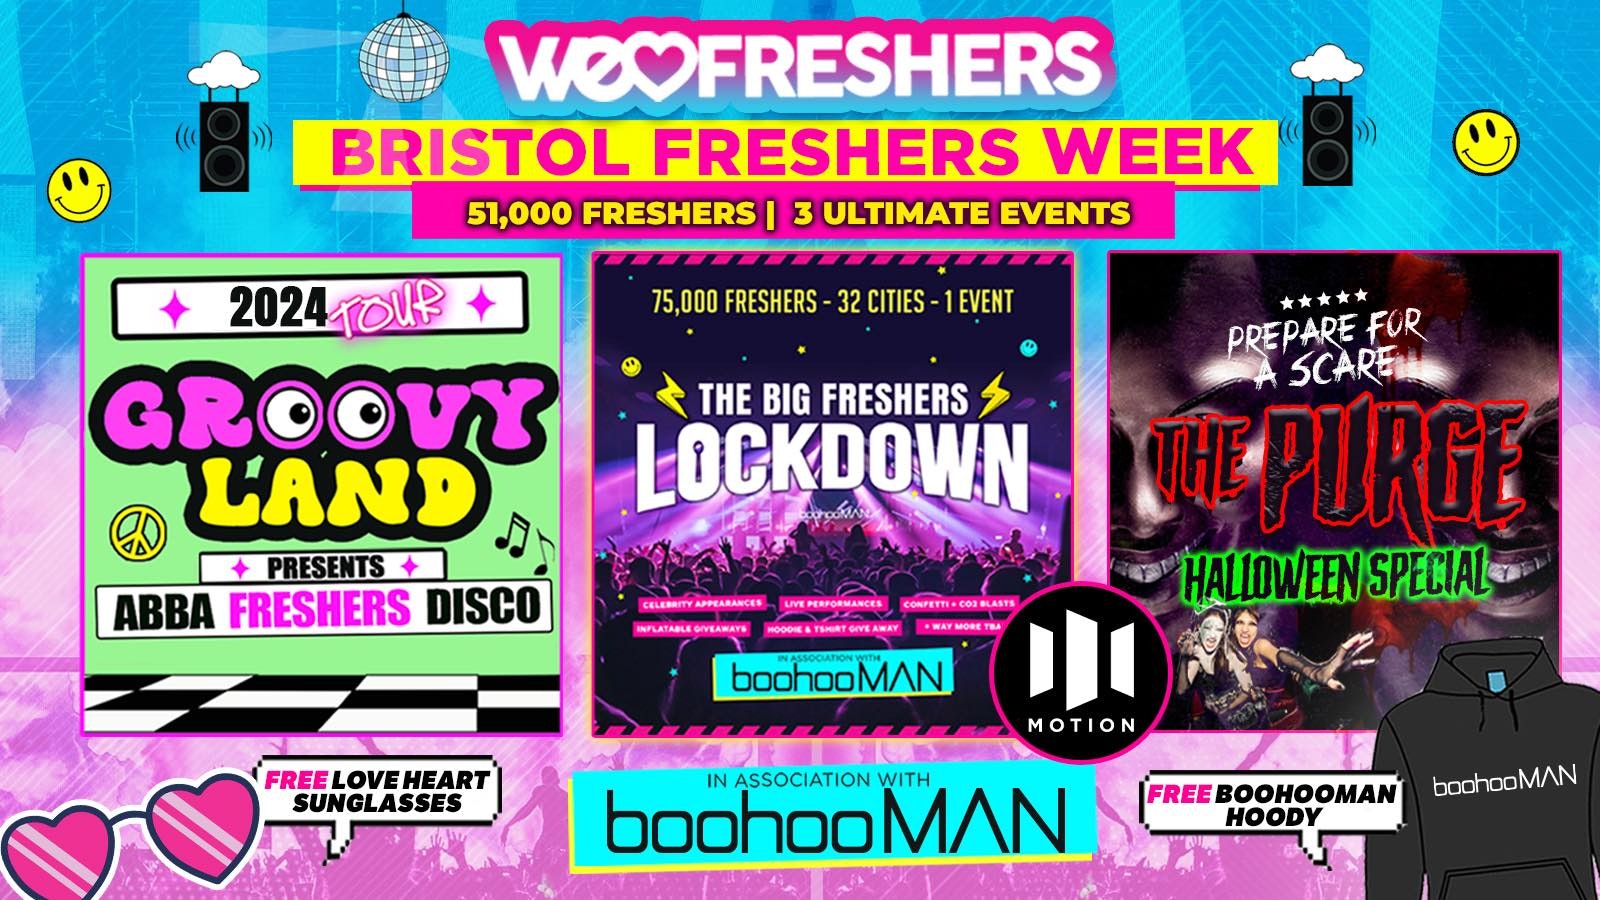 WE LOVE BRISTOL FRESHERS 2024 in association with boohooMAN ❗FREE BOOHOOMAN HOODIE TODAY ONLY ❗